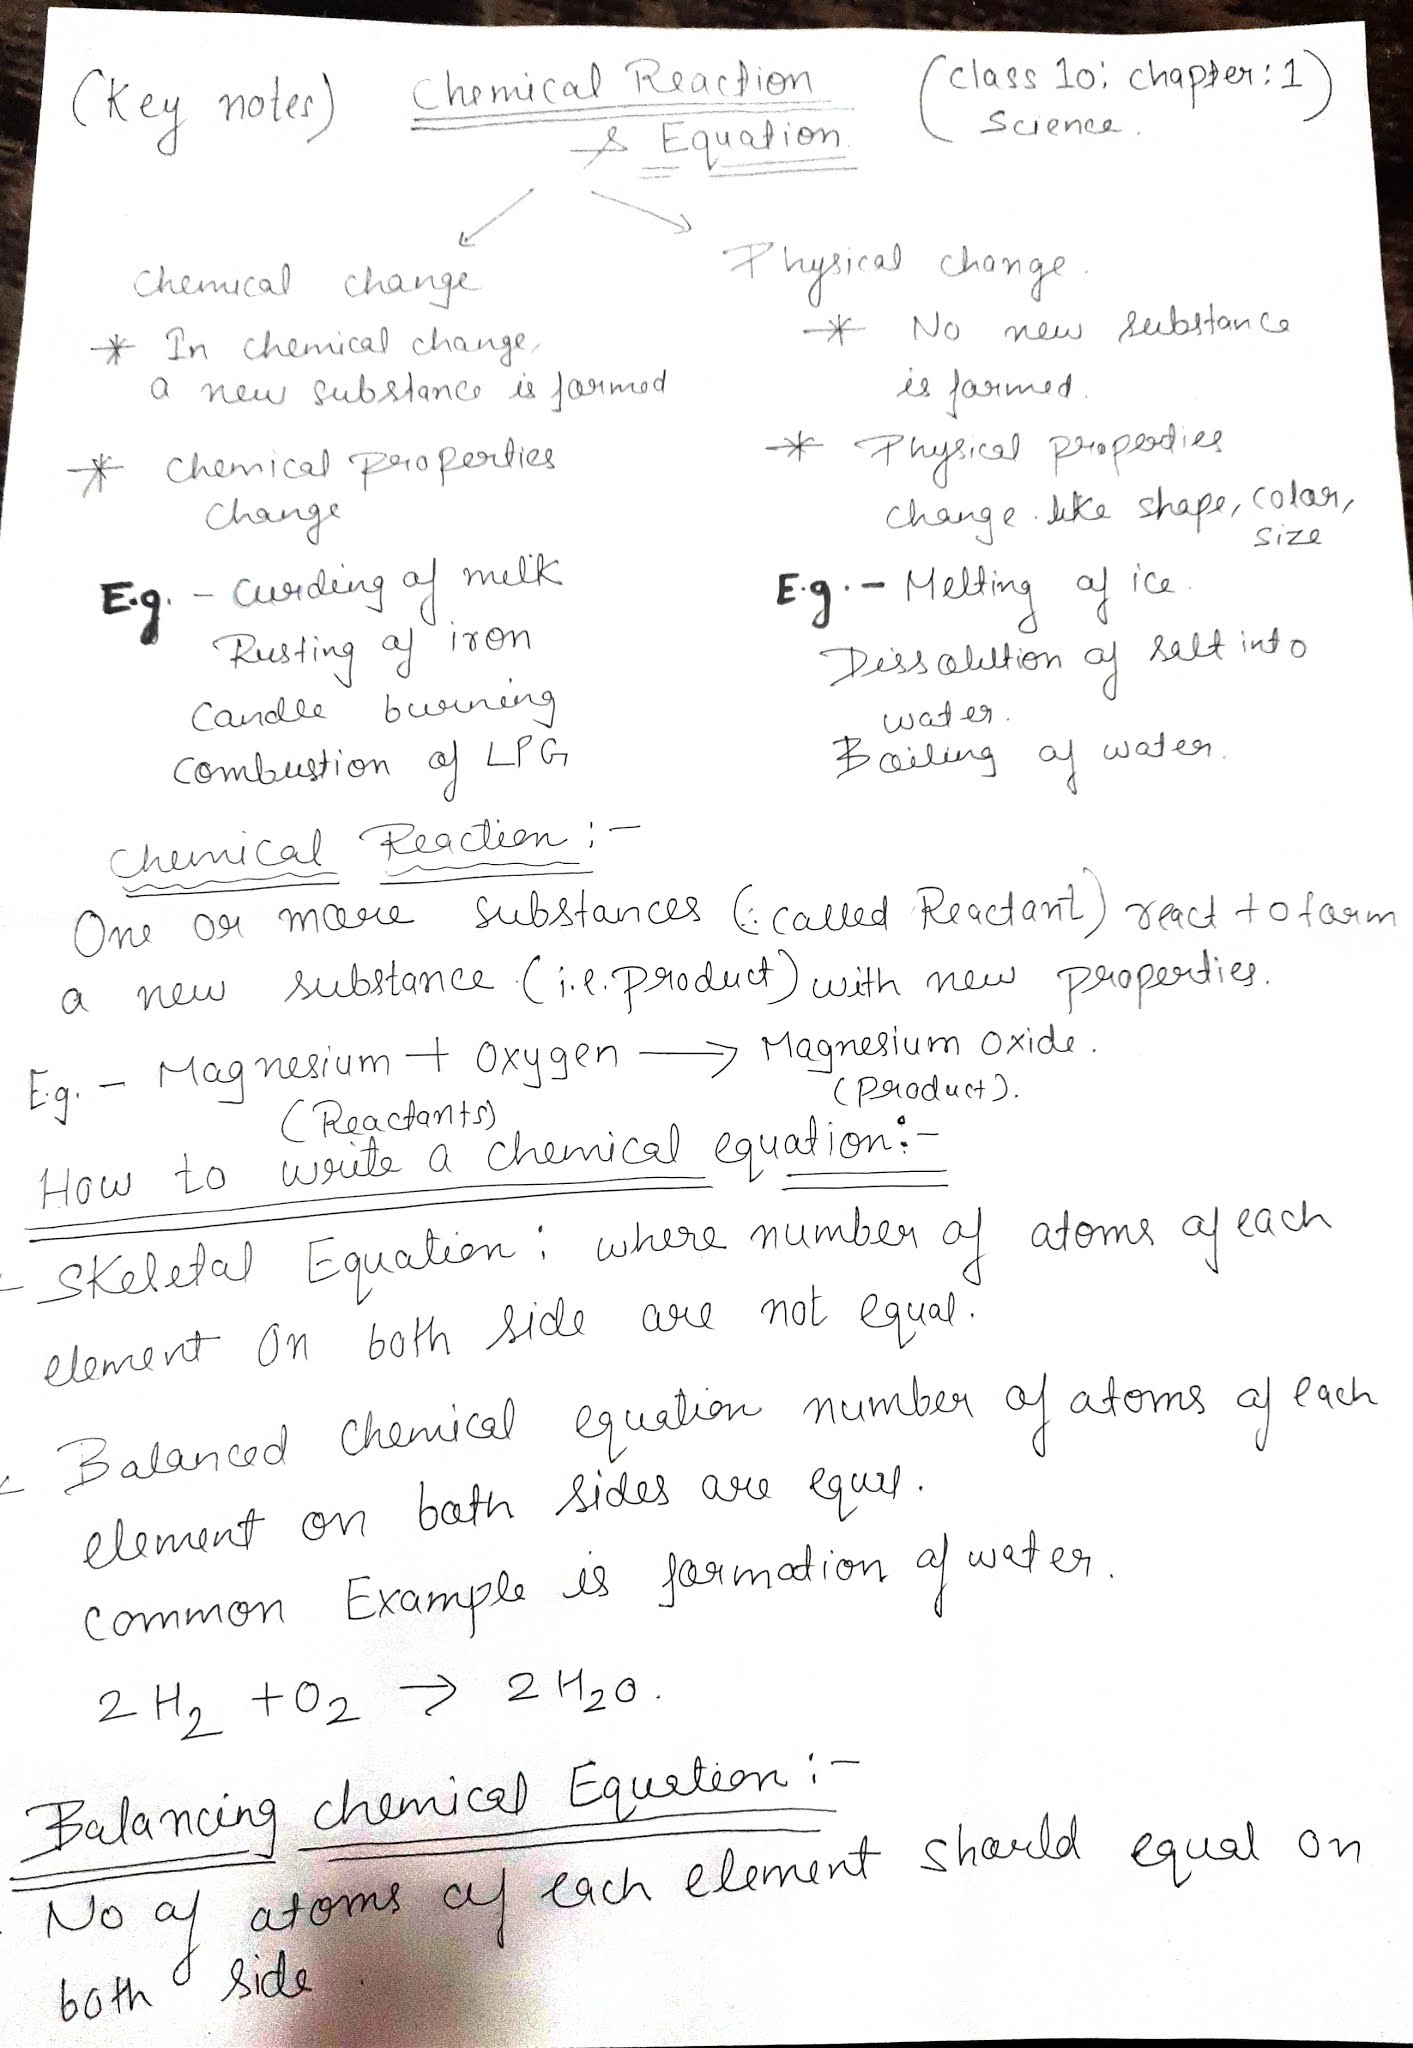 class 10 science assignment chapter wise pdf